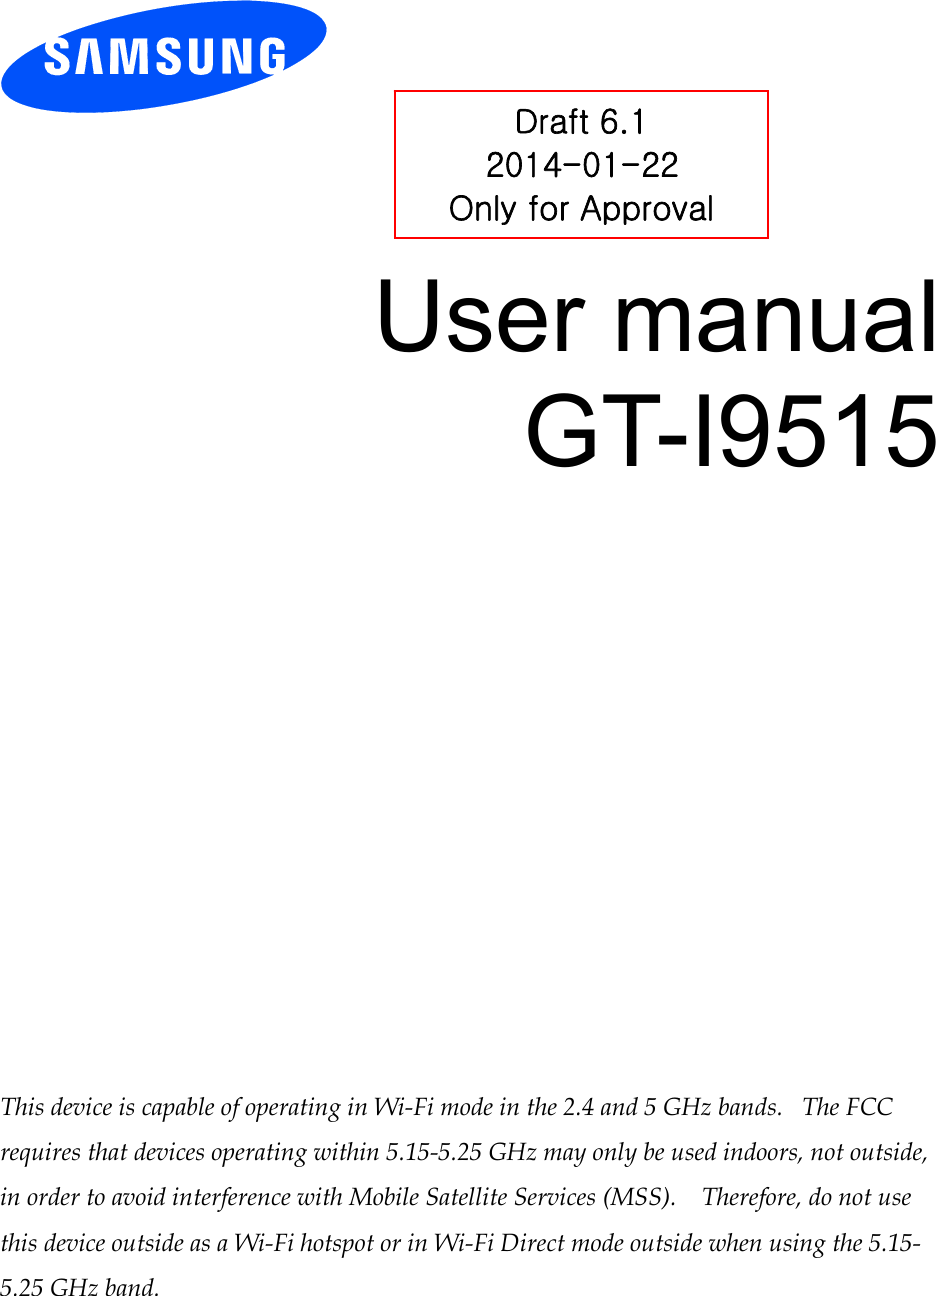          User manual GT-I9515                 This device is capable of operating in Wi-Fi mode in the 2.4 and 5 GHz bands.   The FCC requires that devices operating within 5.15-5.25 GHz may only be used indoors, not outside, in order to avoid interference with Mobile Satellite Services (MSS).    Therefore, do not use this device outside as a Wi-Fi hotspot or in Wi-Fi Direct mode outside when using the 5.15-5.25 GHz band.  Draft 6.1 2014-01-22 Only for Approval 